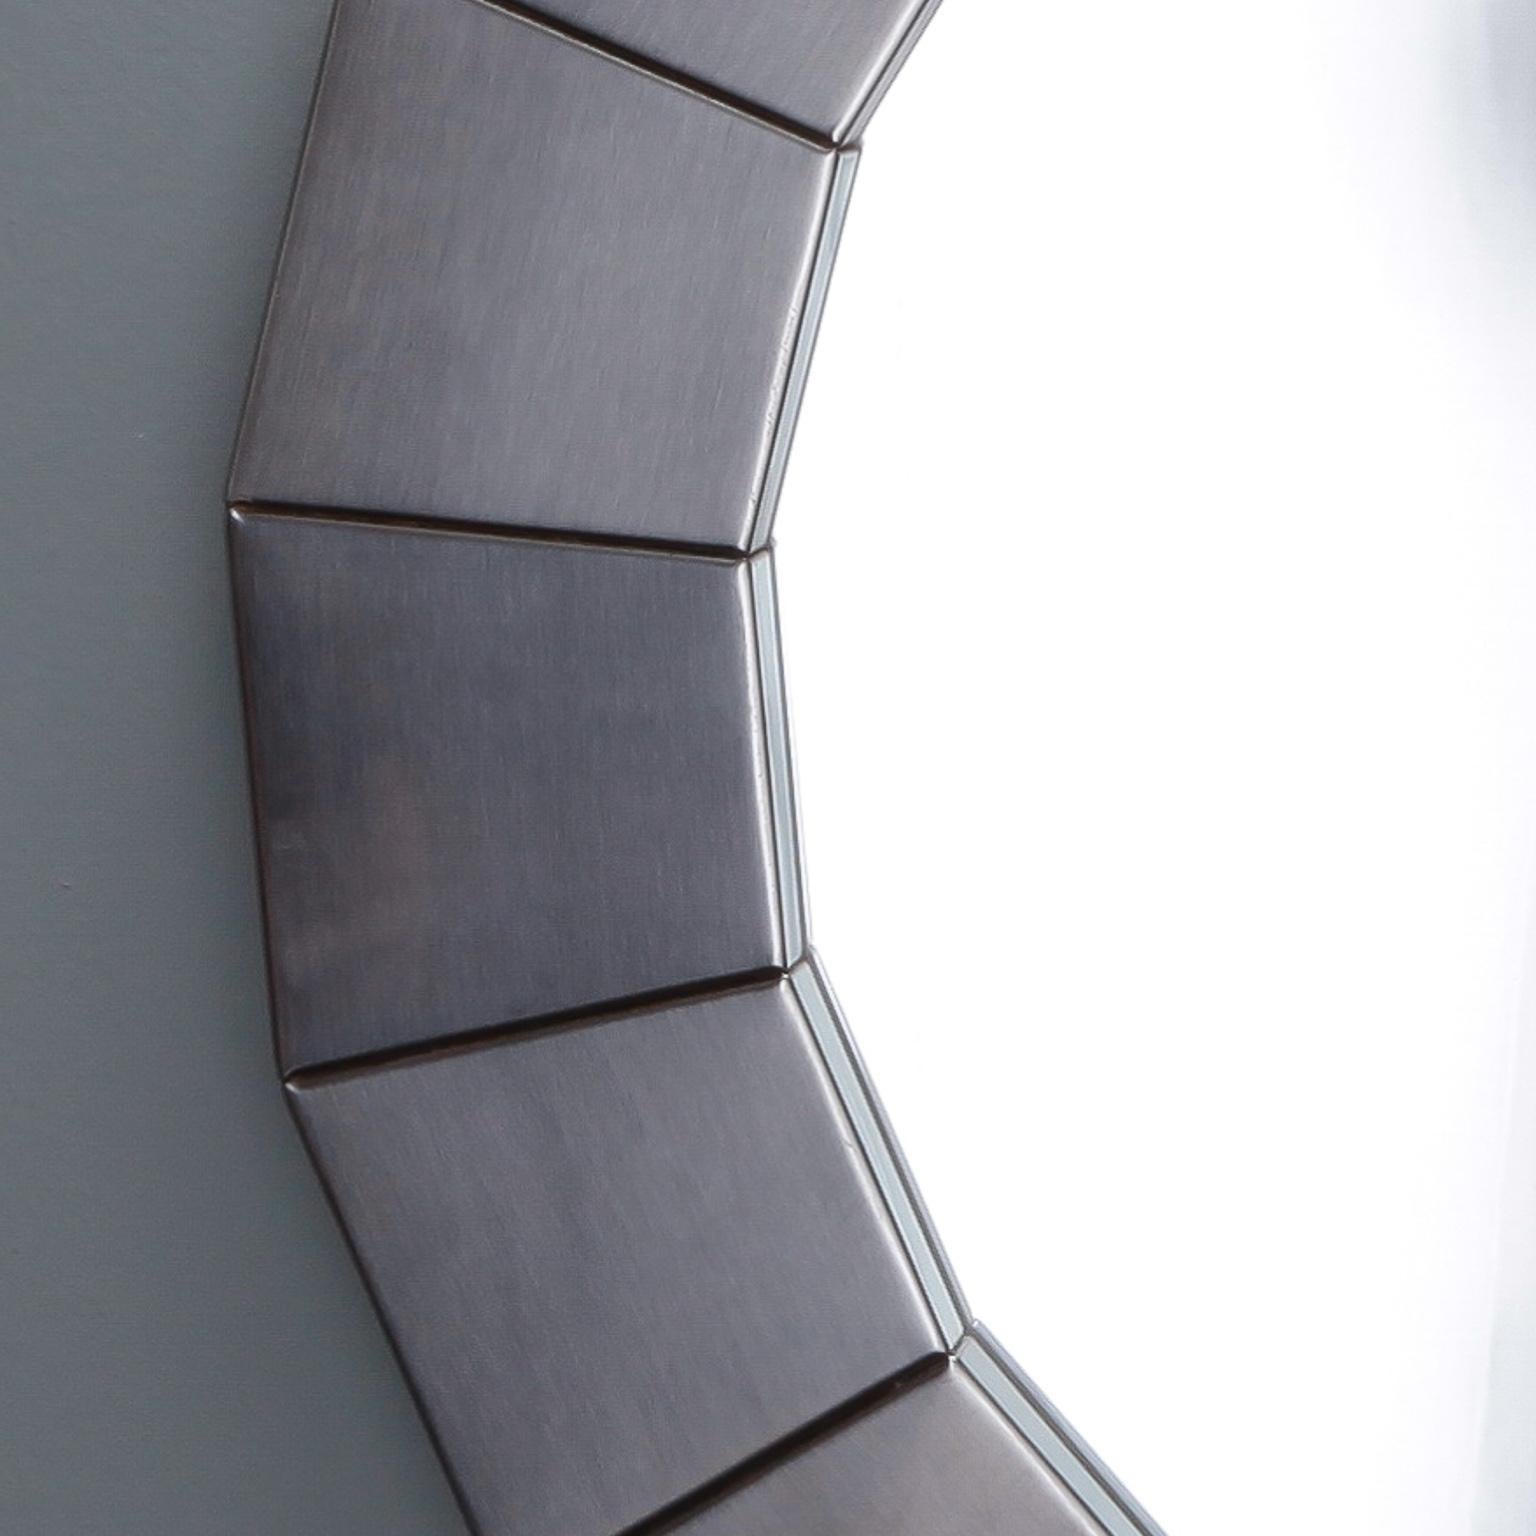 Round mirror with wide, sectioned frame of silver tone brushed aluminum, circa 1970s. Actual Mirror Size: 18.75” diameter. Unknown maker. Found in Belgium.